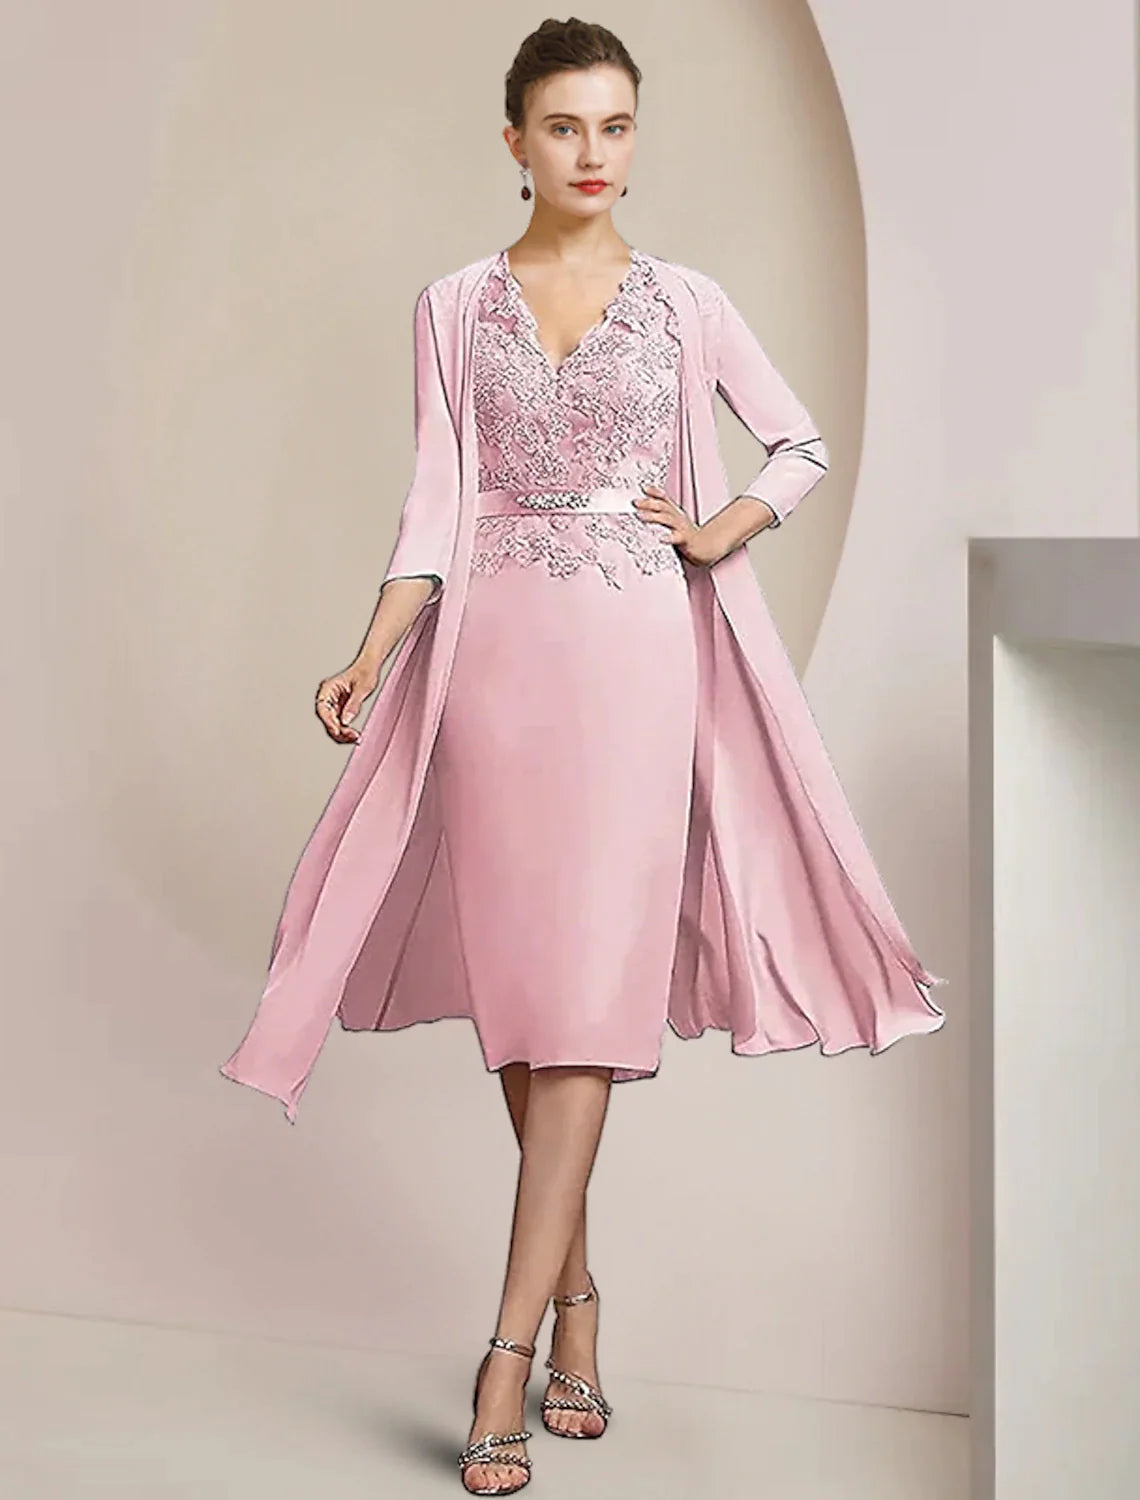 Two Piece Sheath / Column Mother of the Bride Dress Formal Wedding Guest Elegant V Neck Knee Length Chiffon Lace Sleeveless Jacket Dresses with Appliques Crystal Brooch